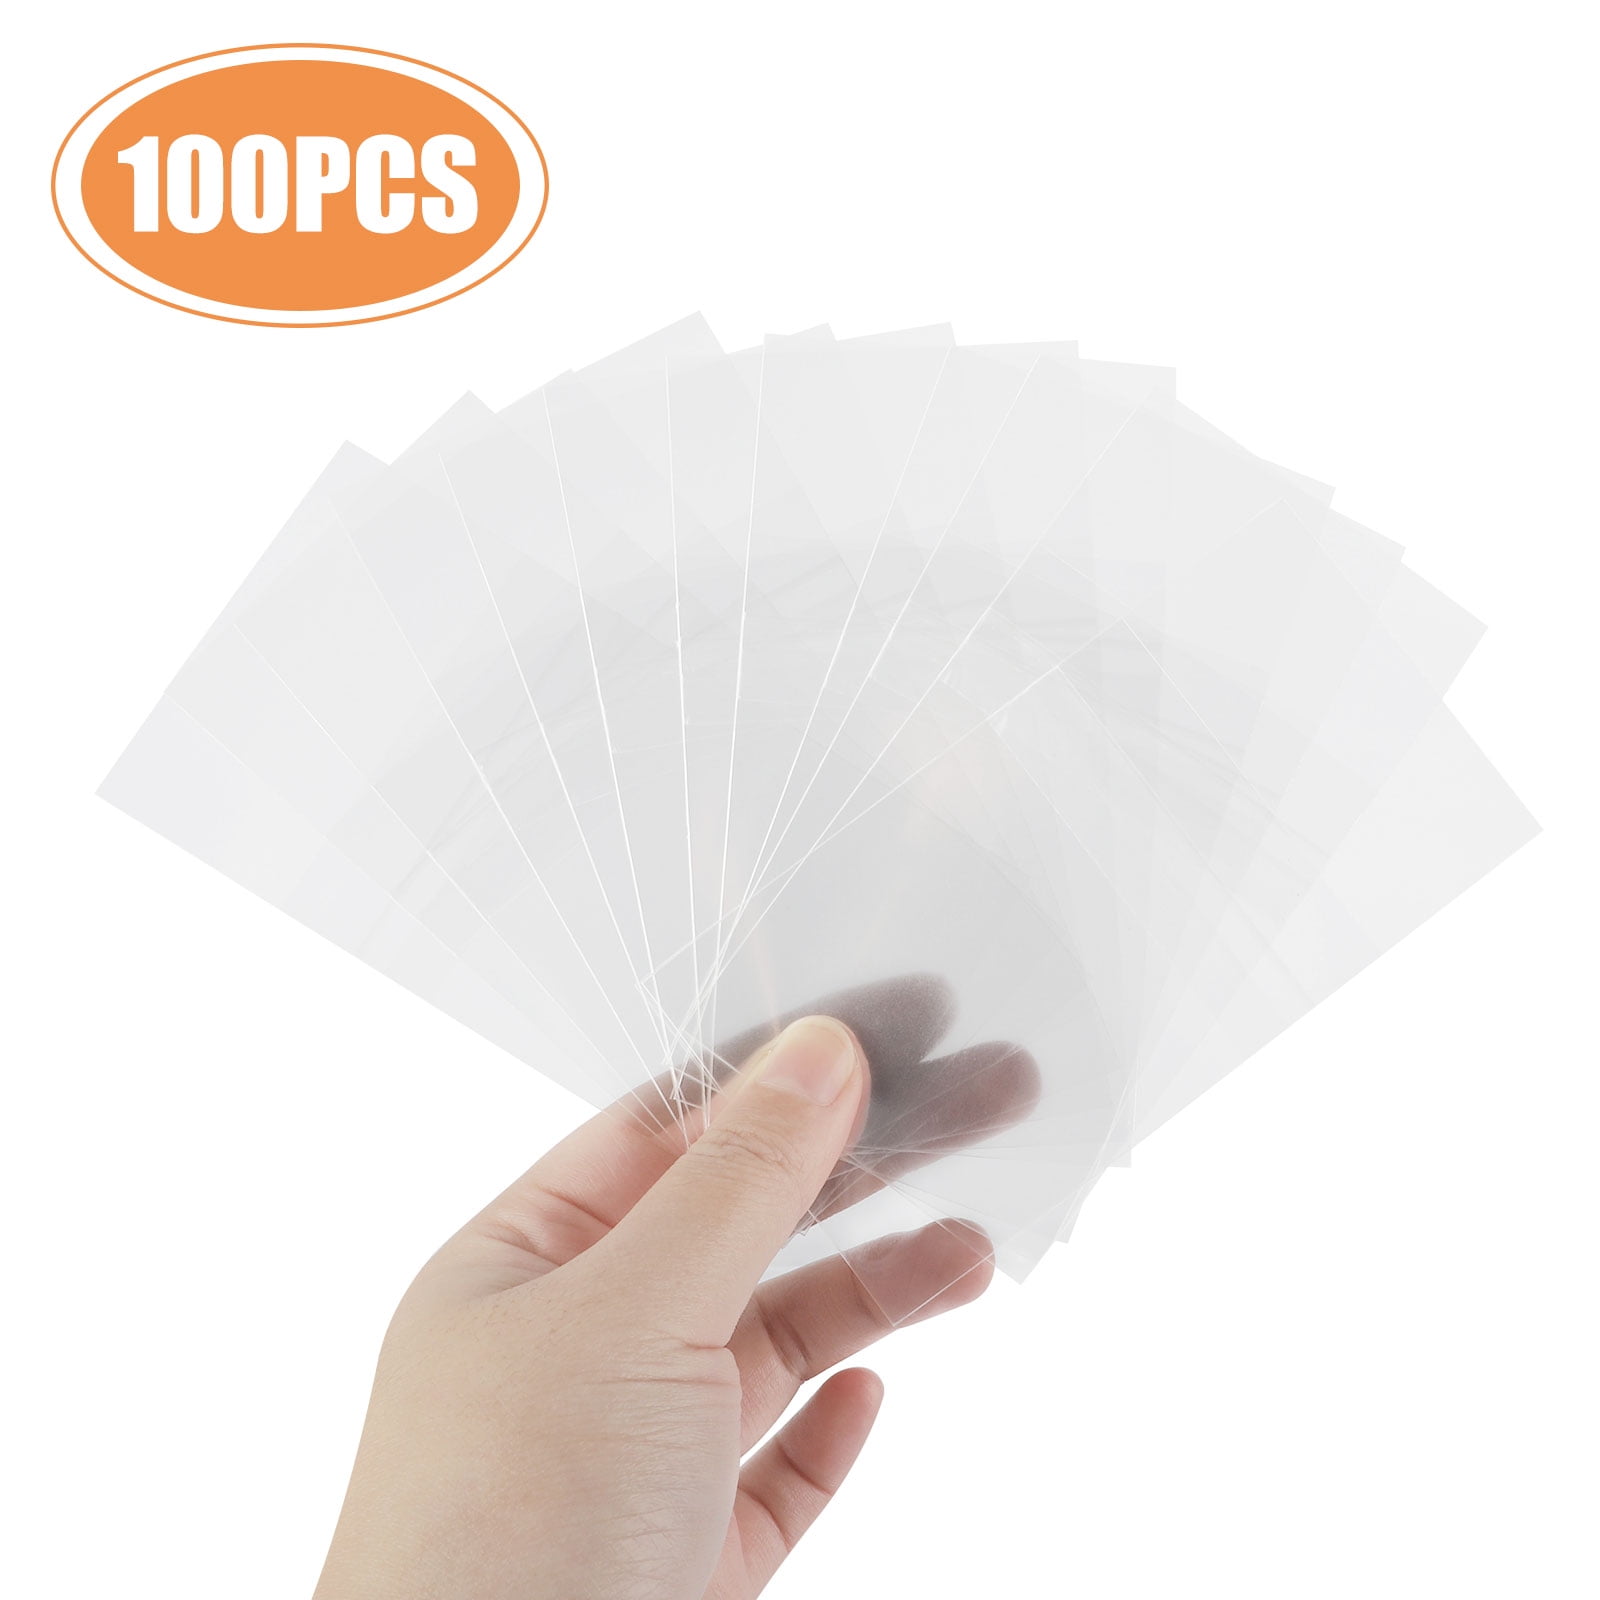 10 COUPON SLEEVES PAGES ORGANIZER STORAGE 8 POCKET CARD 